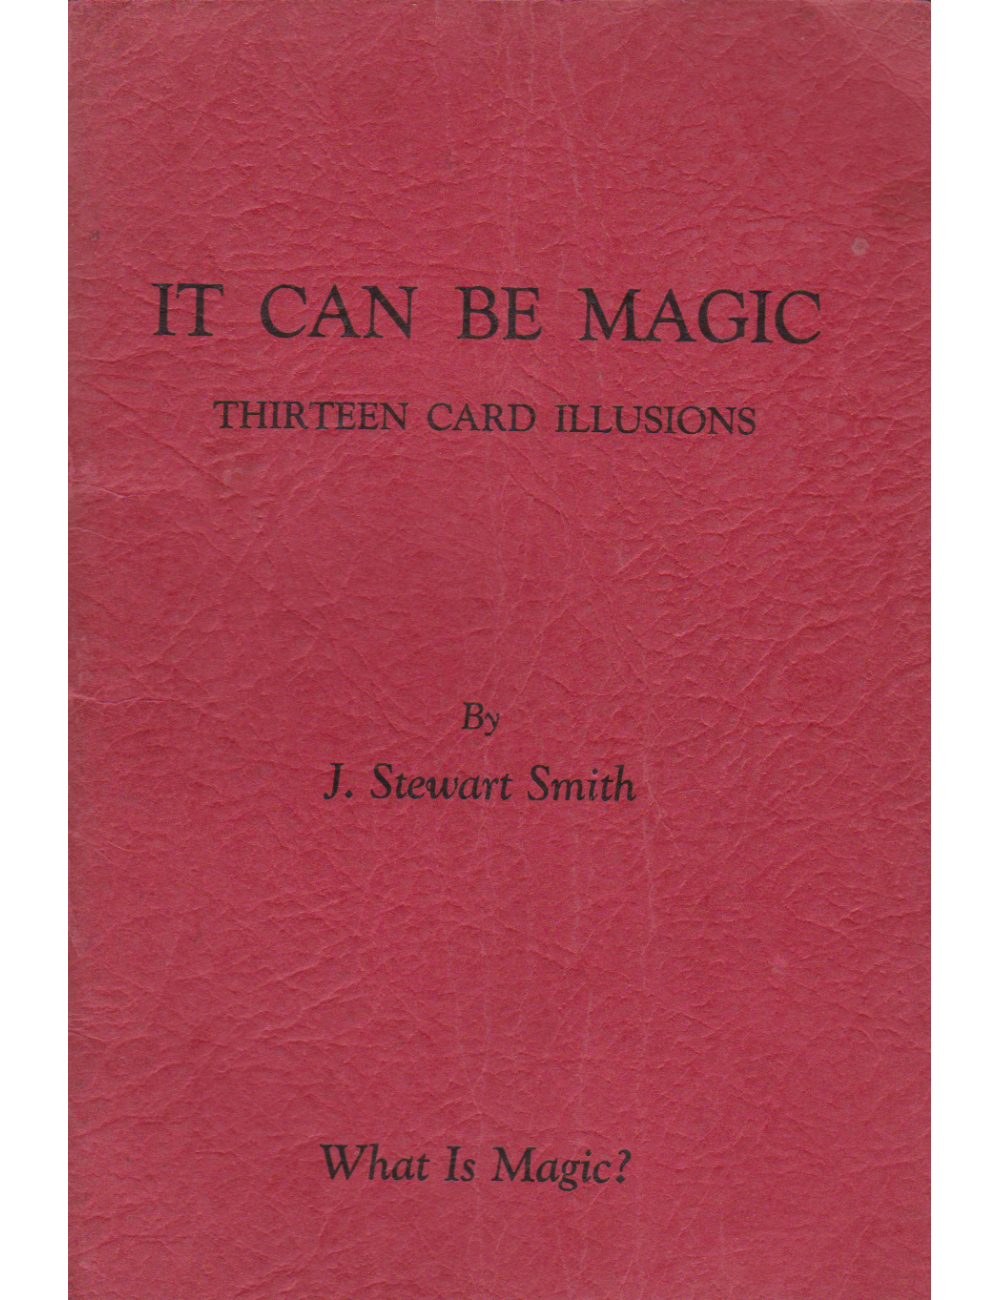 IT CAN BE MAGIC THIRTEEN CARD ILLUSIONS By J. STEWART SMITH